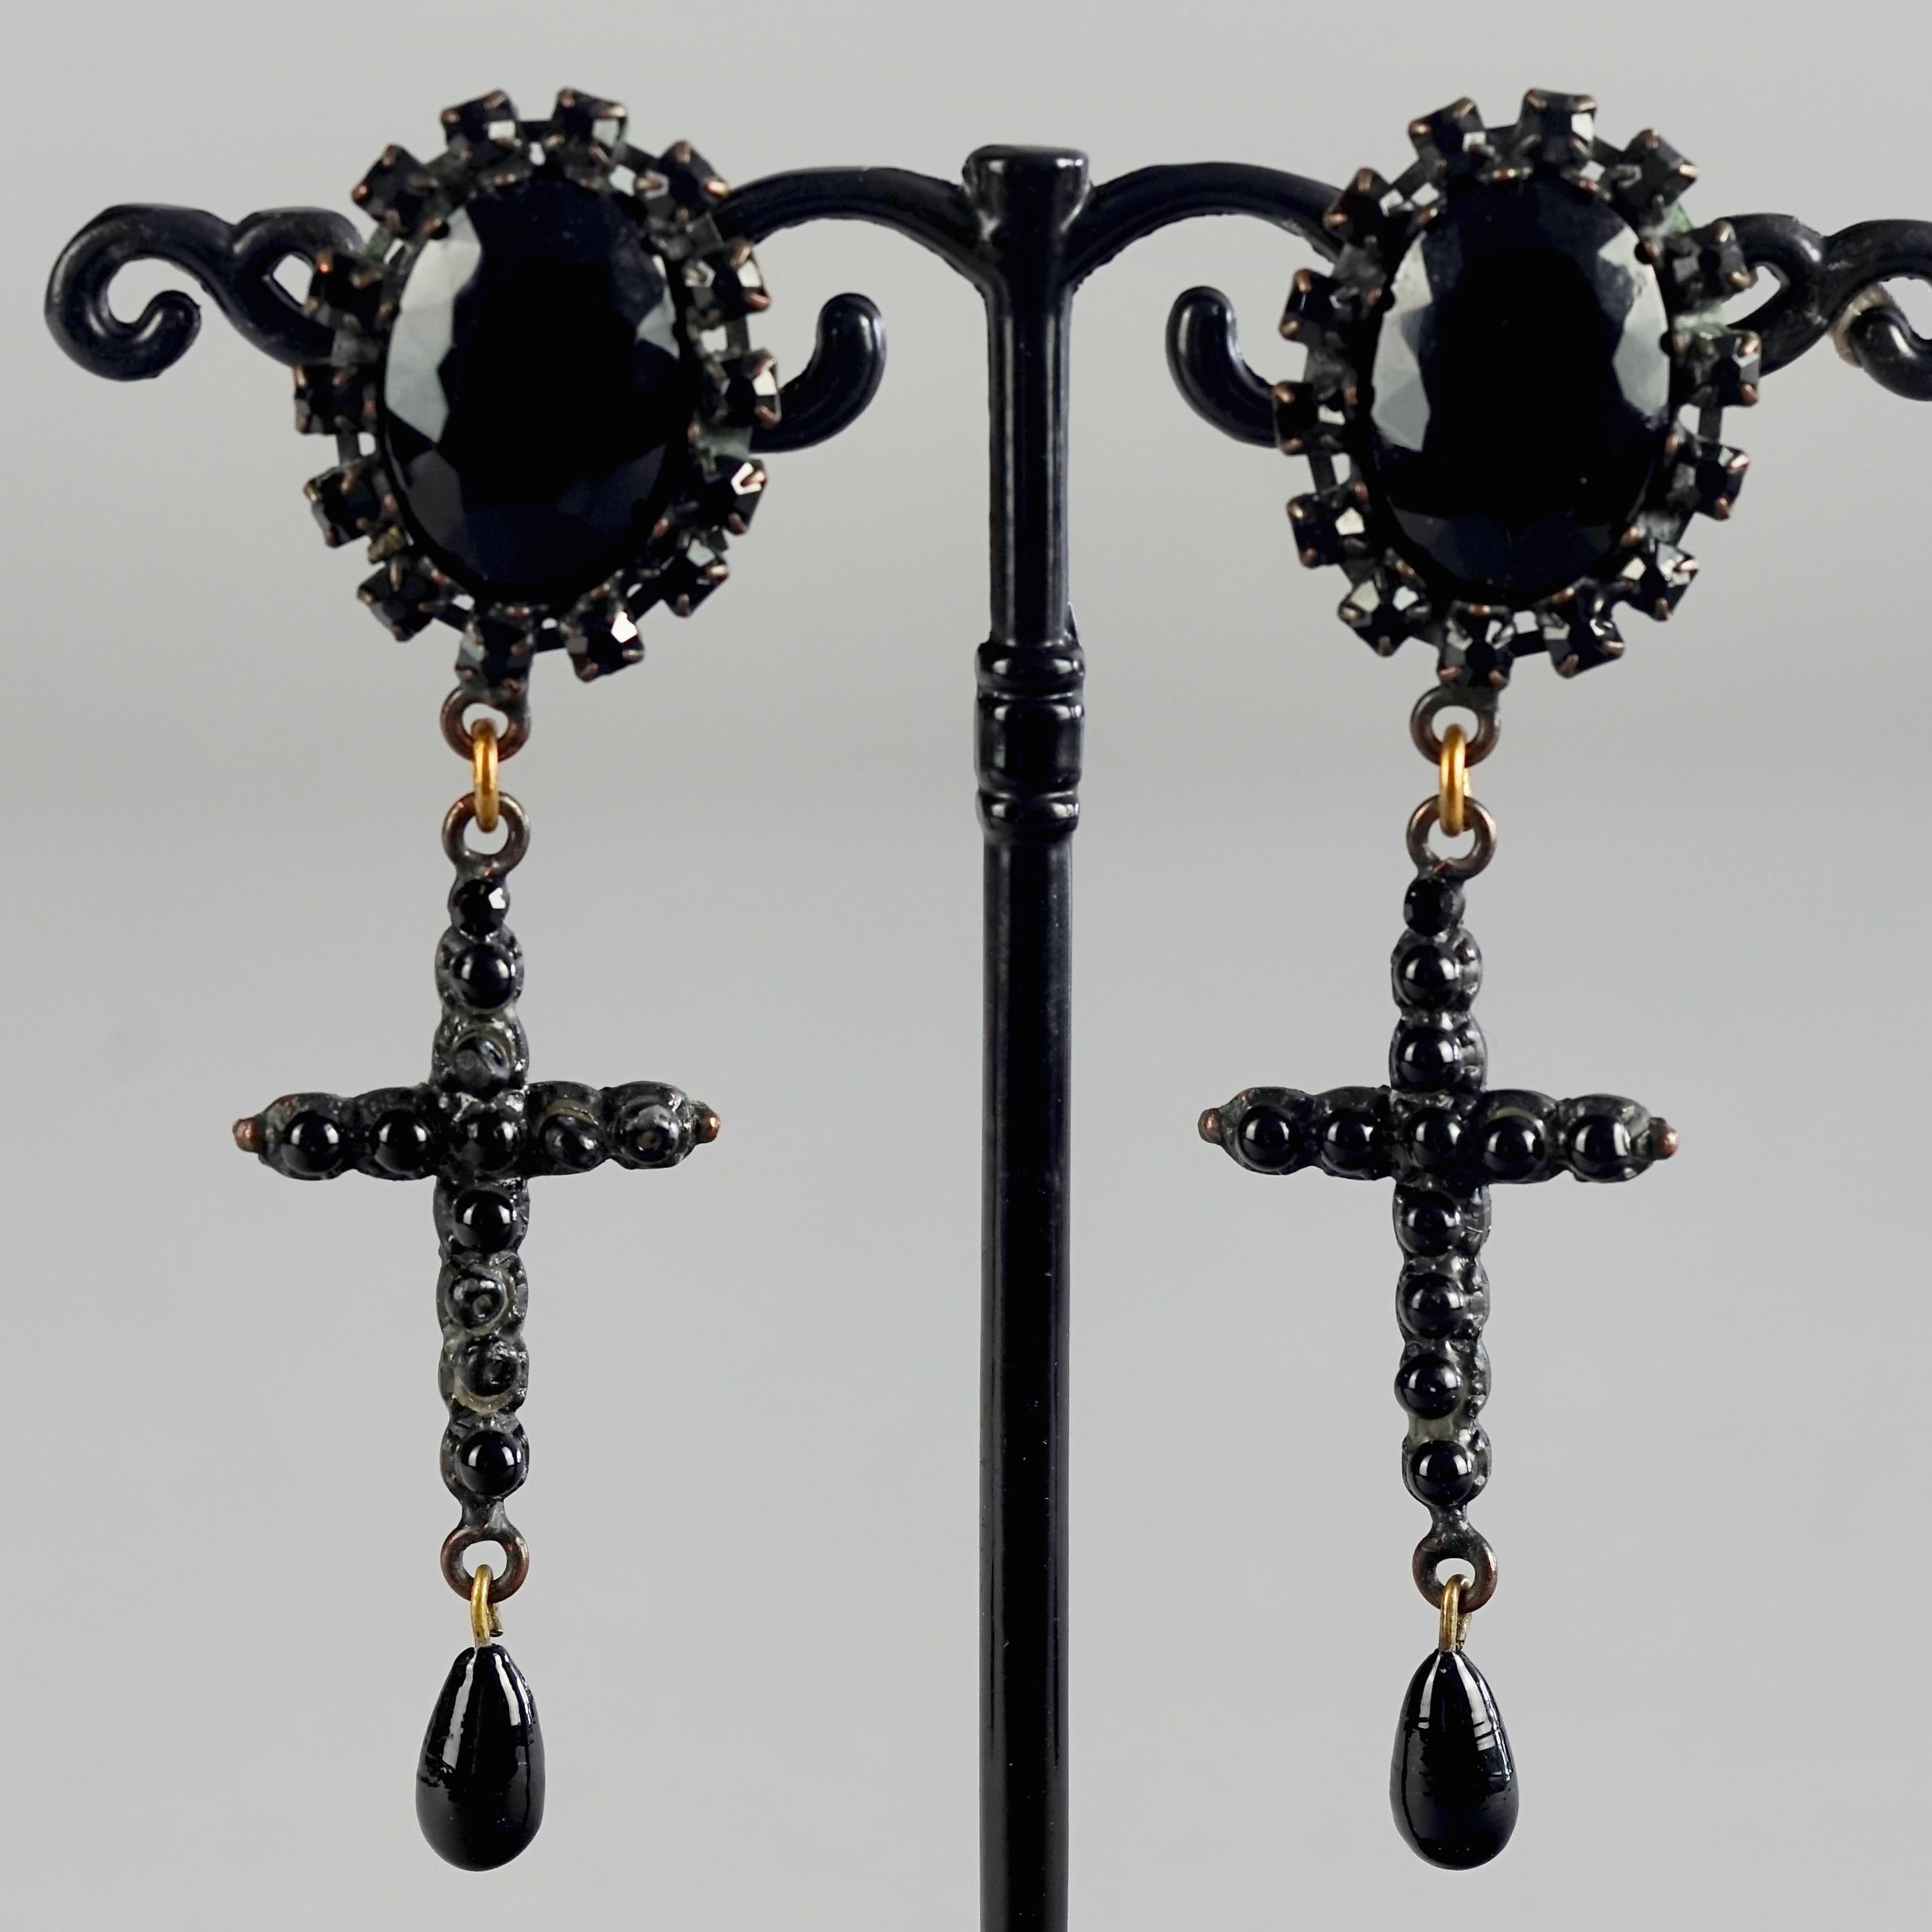 Vintage JEAN PAUL GAULTIER Gothic Black Cross Dangling Earrings In Excellent Condition For Sale In Kingersheim, Alsace